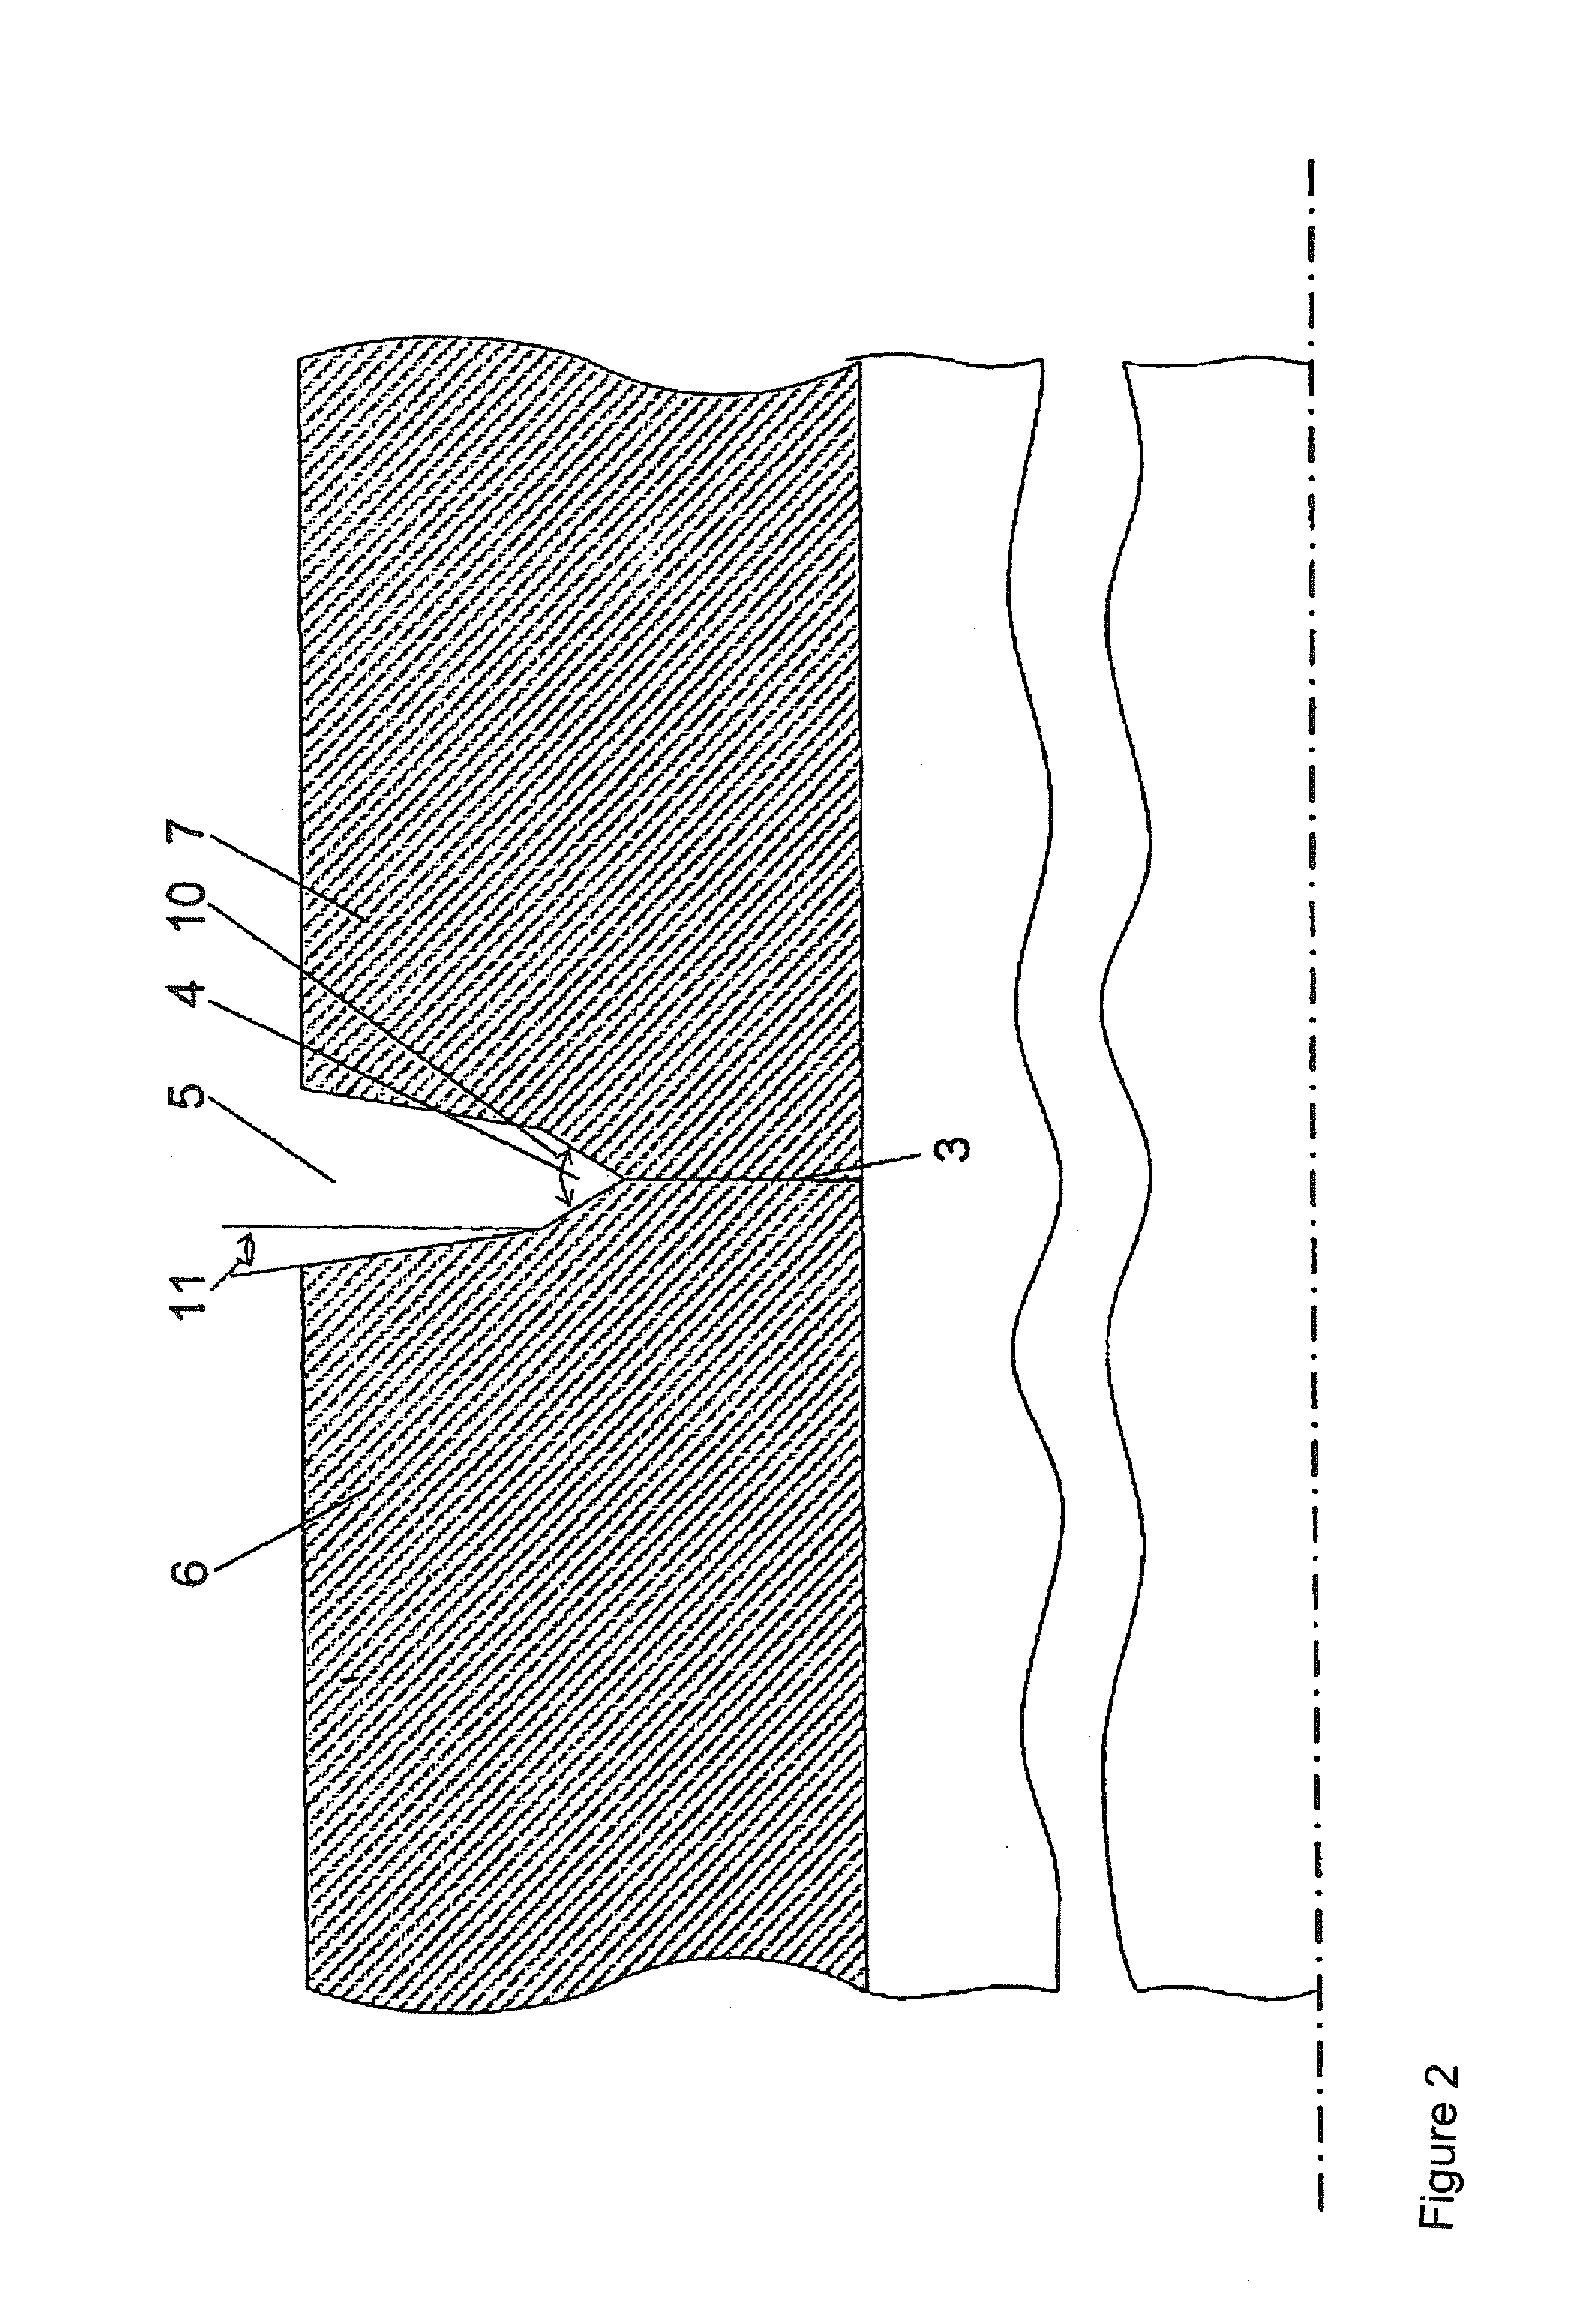 Method for connecting thick-walled metal workpieces by welding